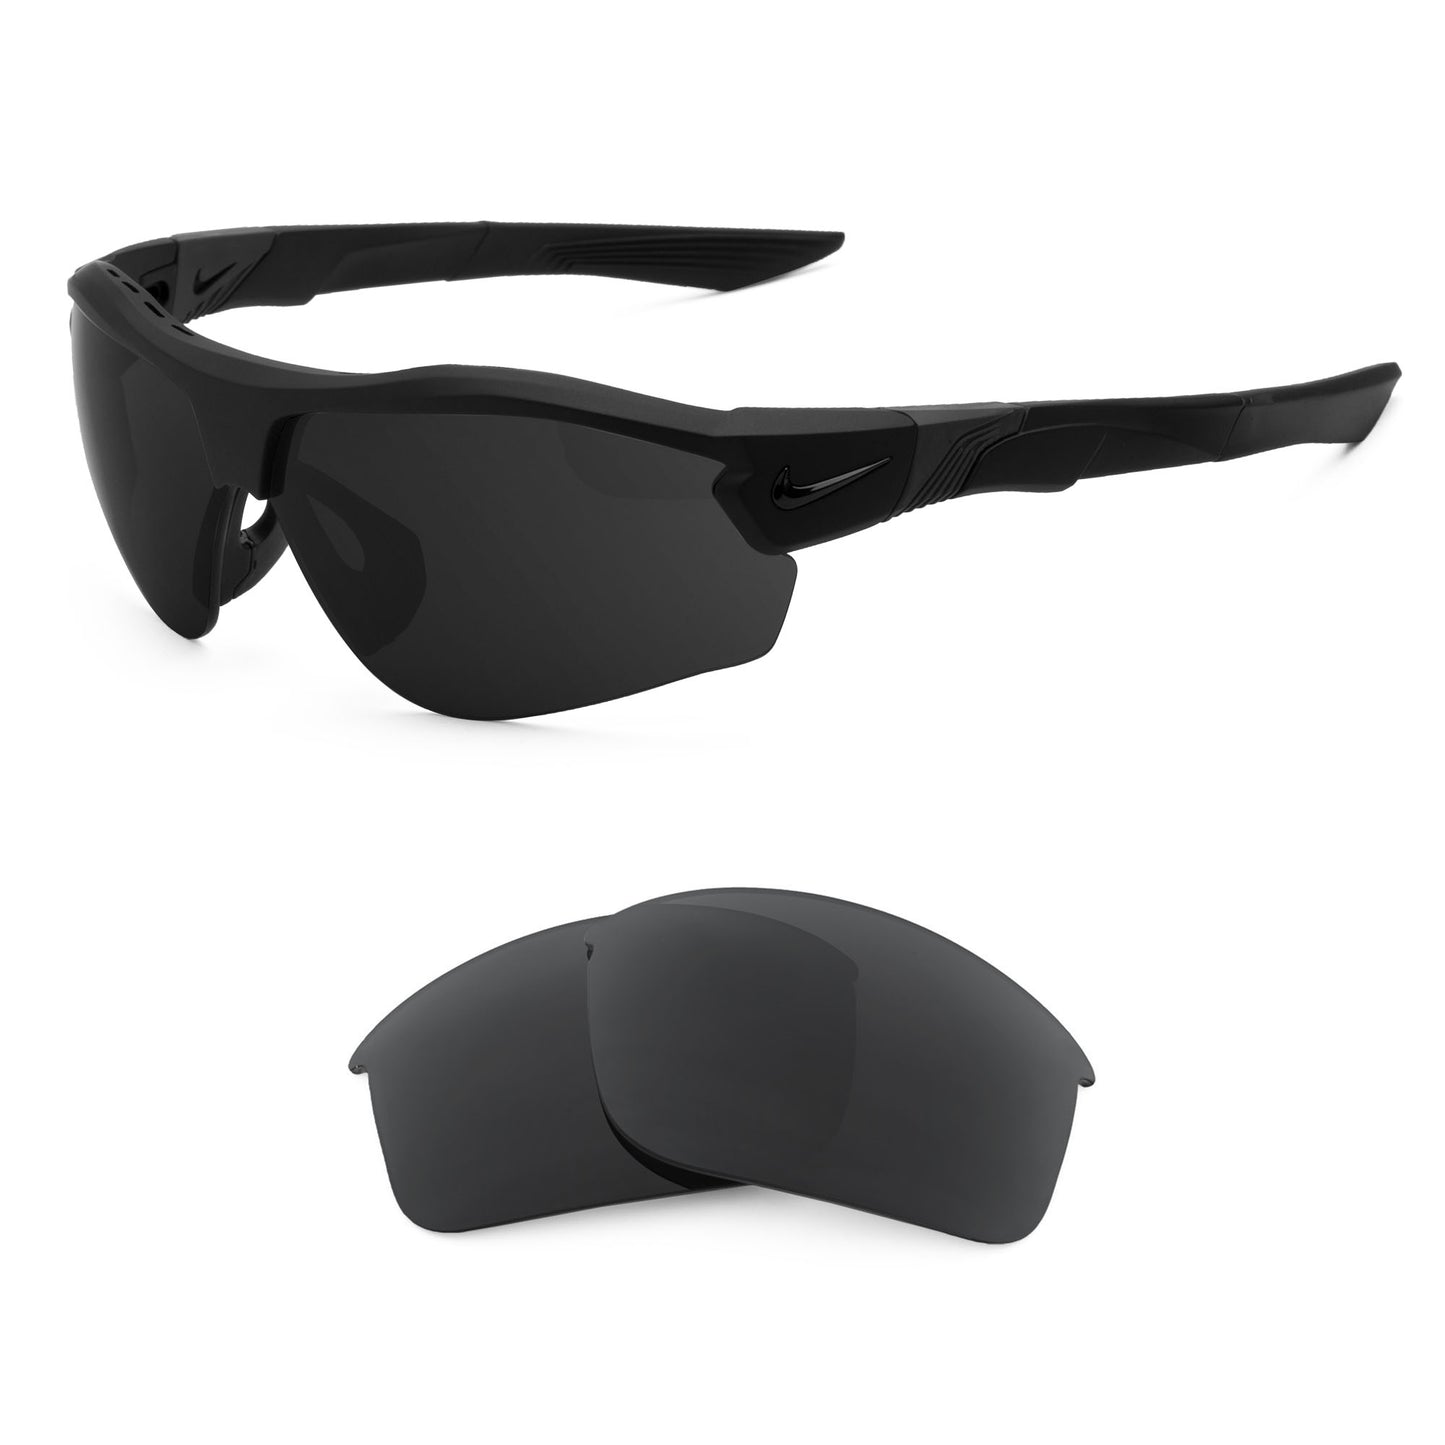 Nike Show X3 sunglasses with replacement lenses